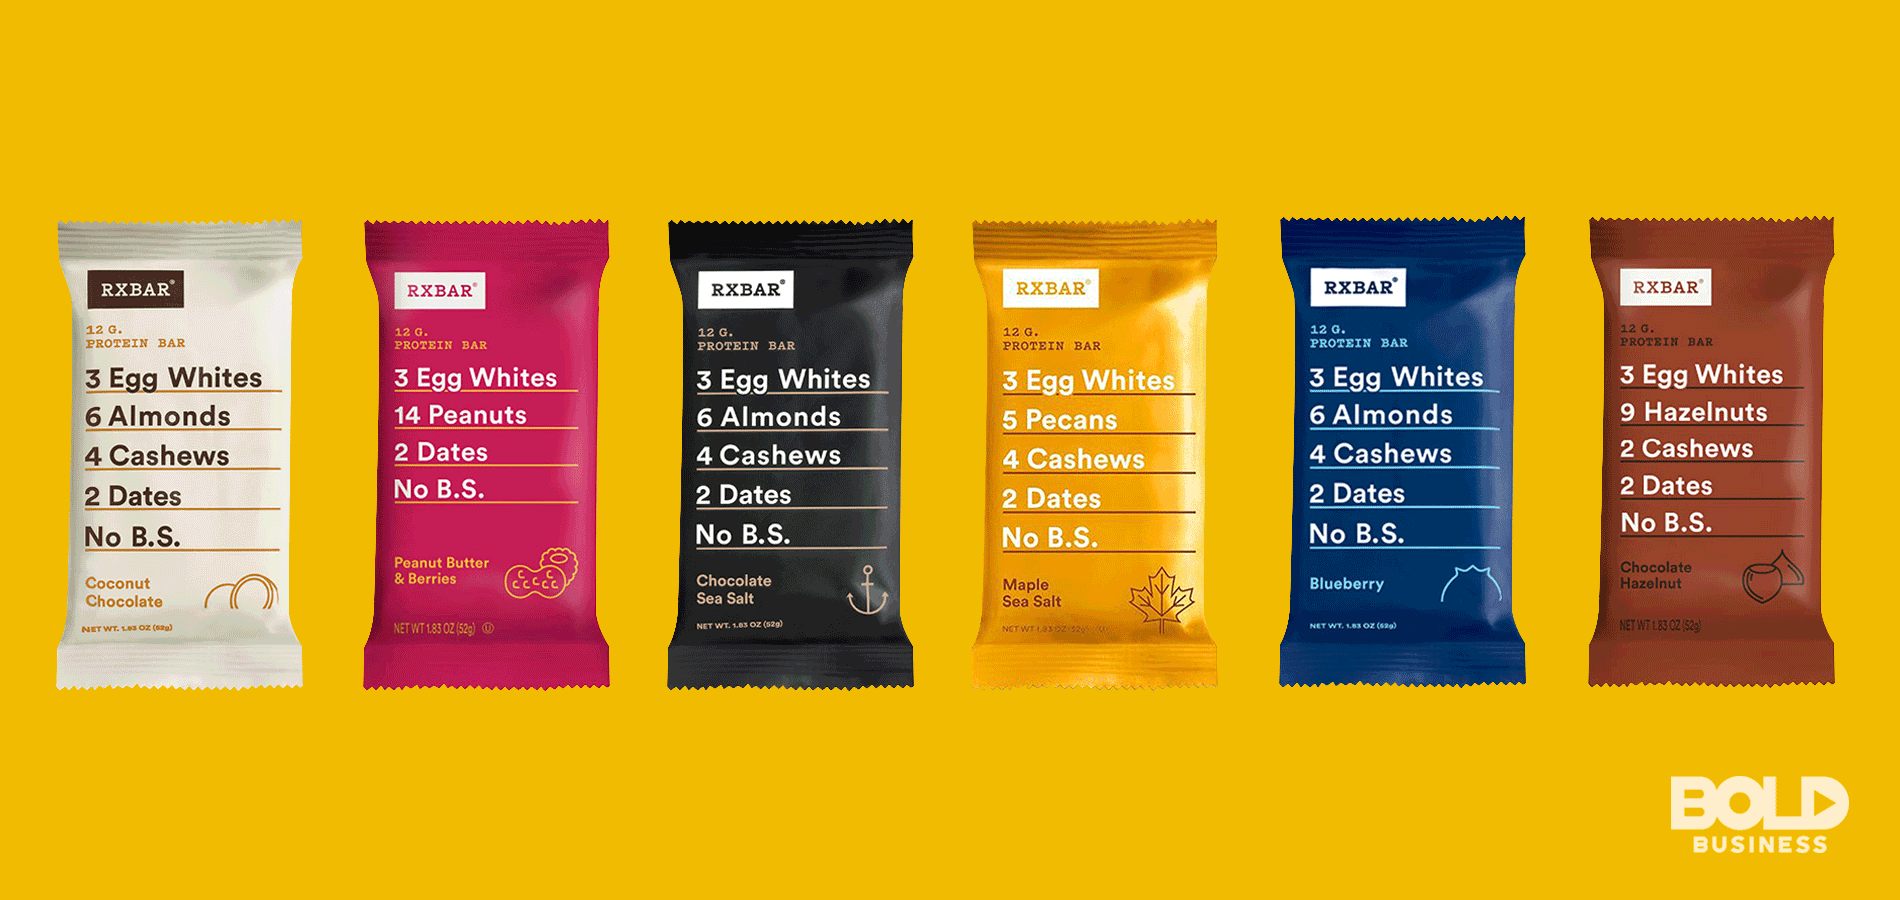 As raw food protein bars go, you can't go wrong with RXBar.